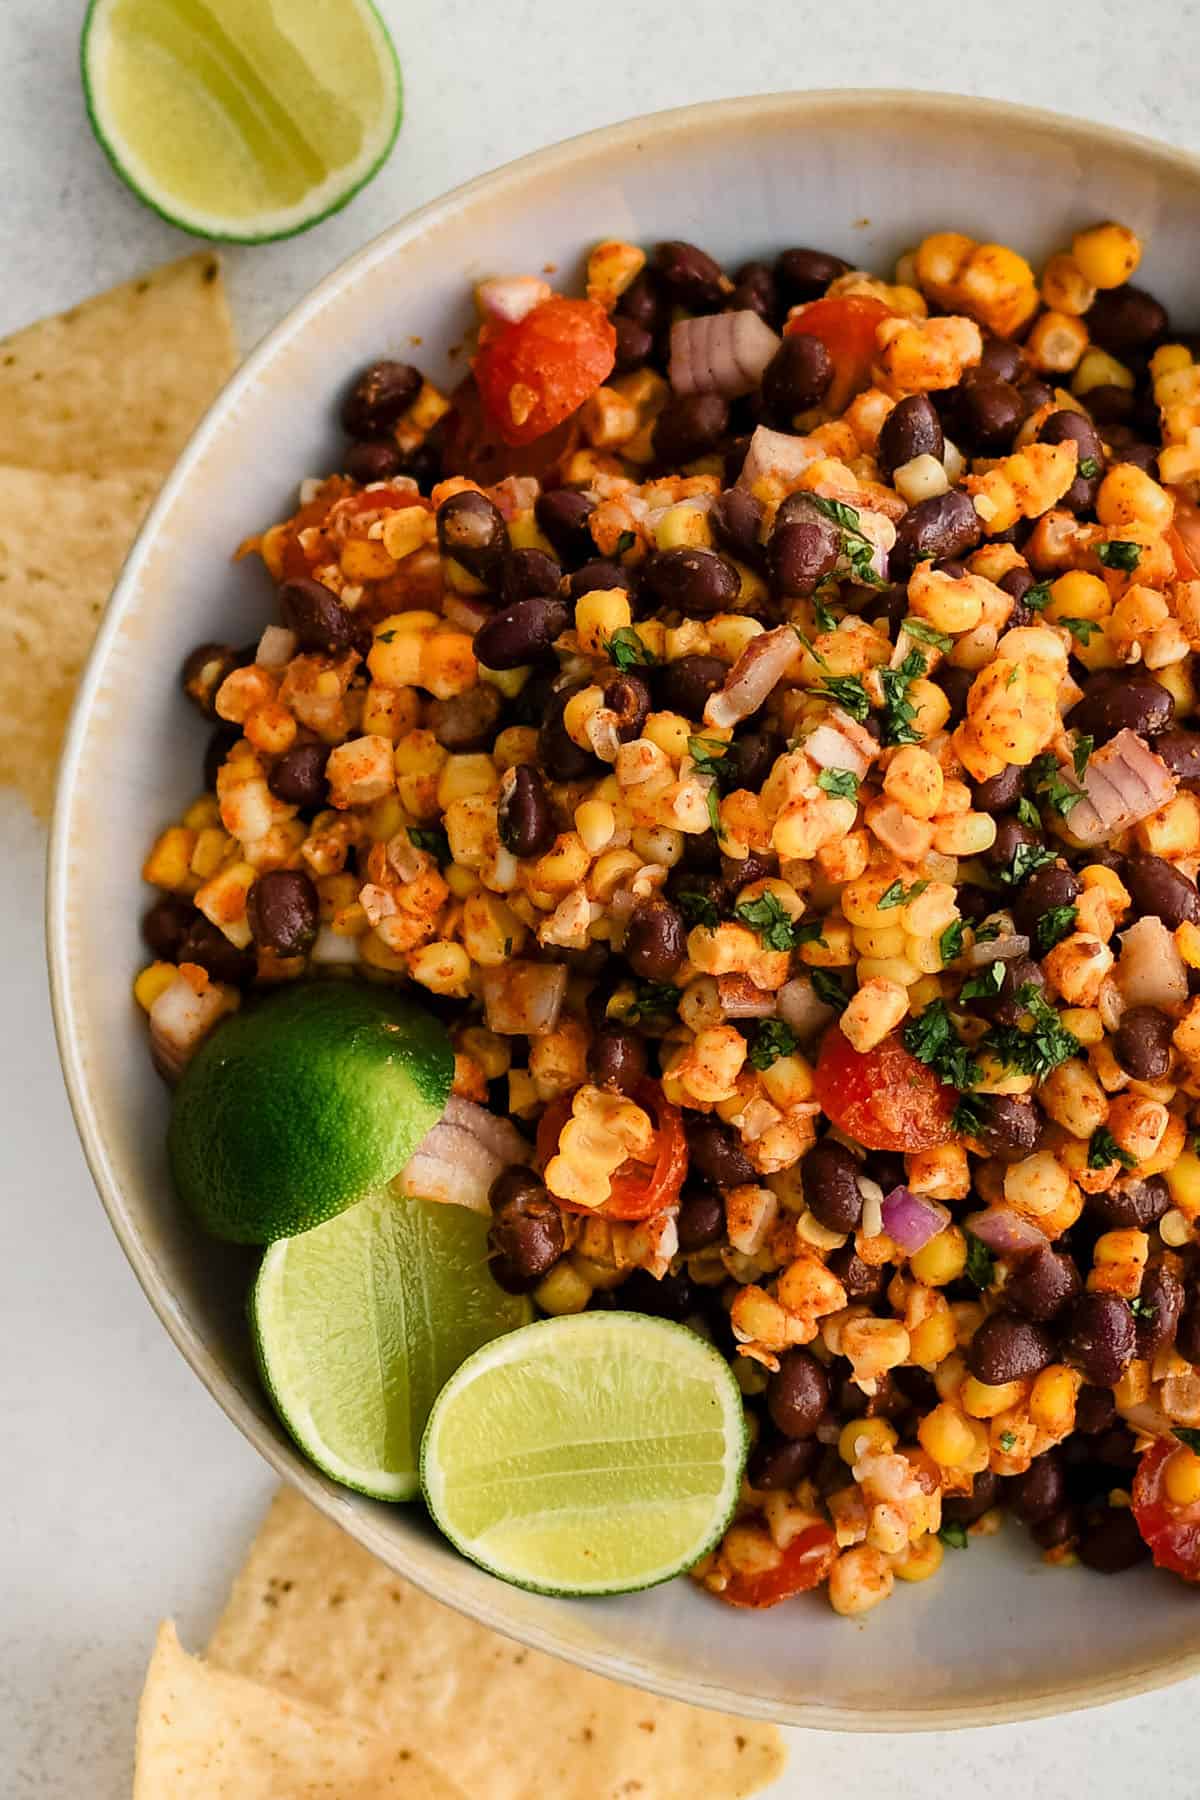 corn and black bean salad in a white bowl with limes